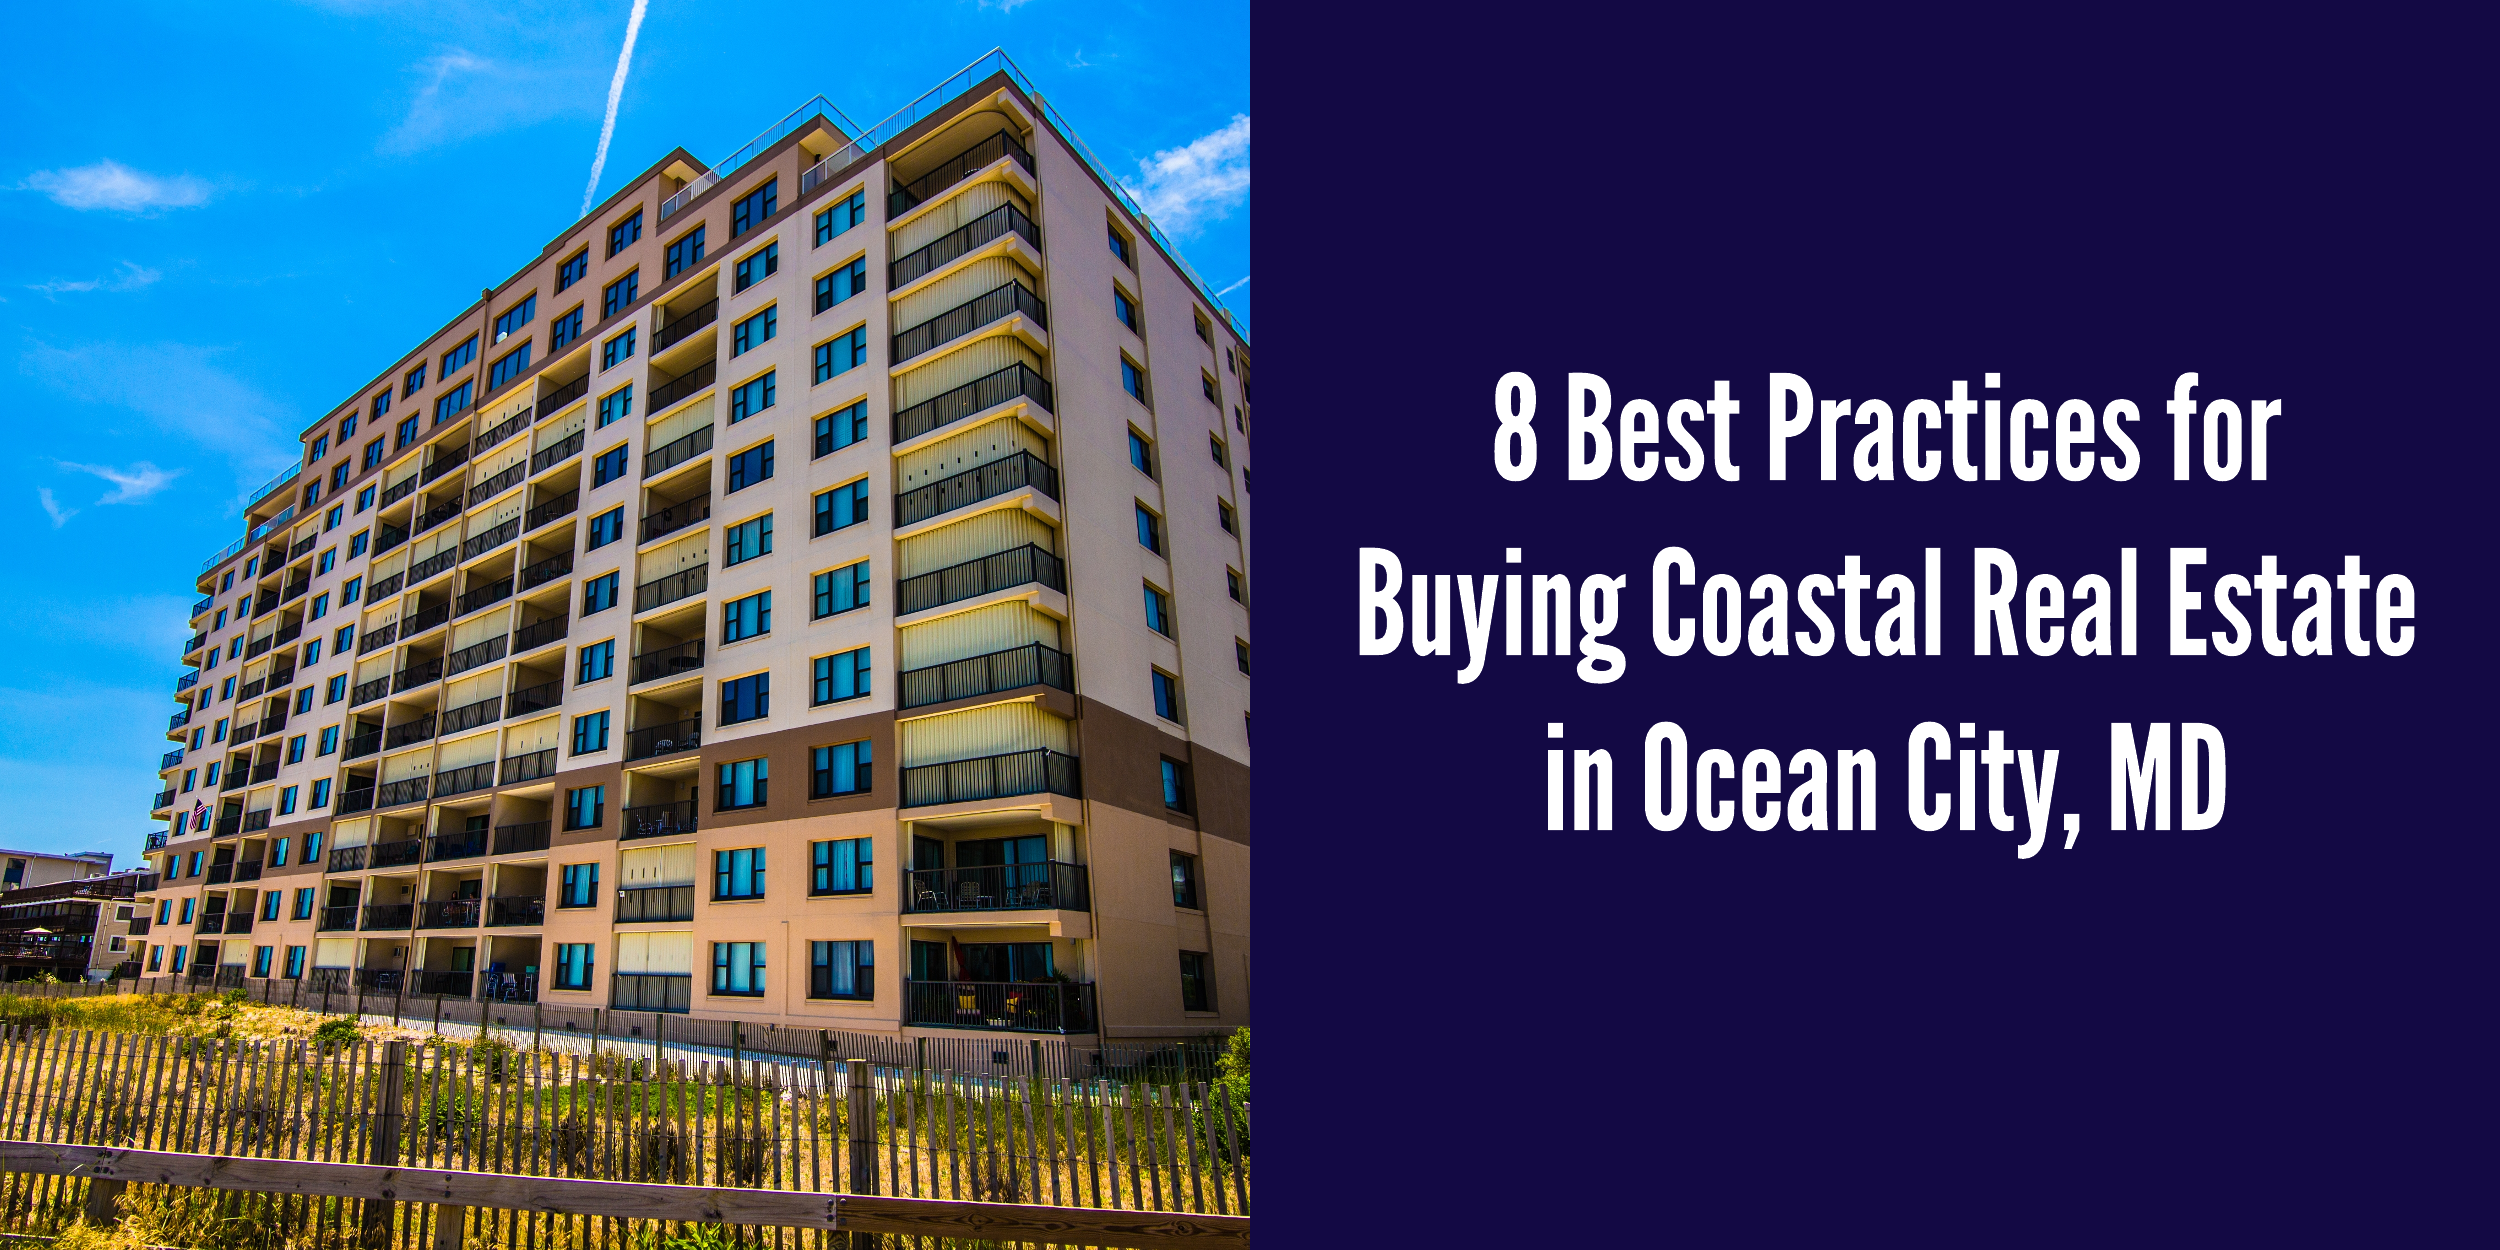 8 Best Practices for Buying Coastal Real Estate in Ocean City, MD